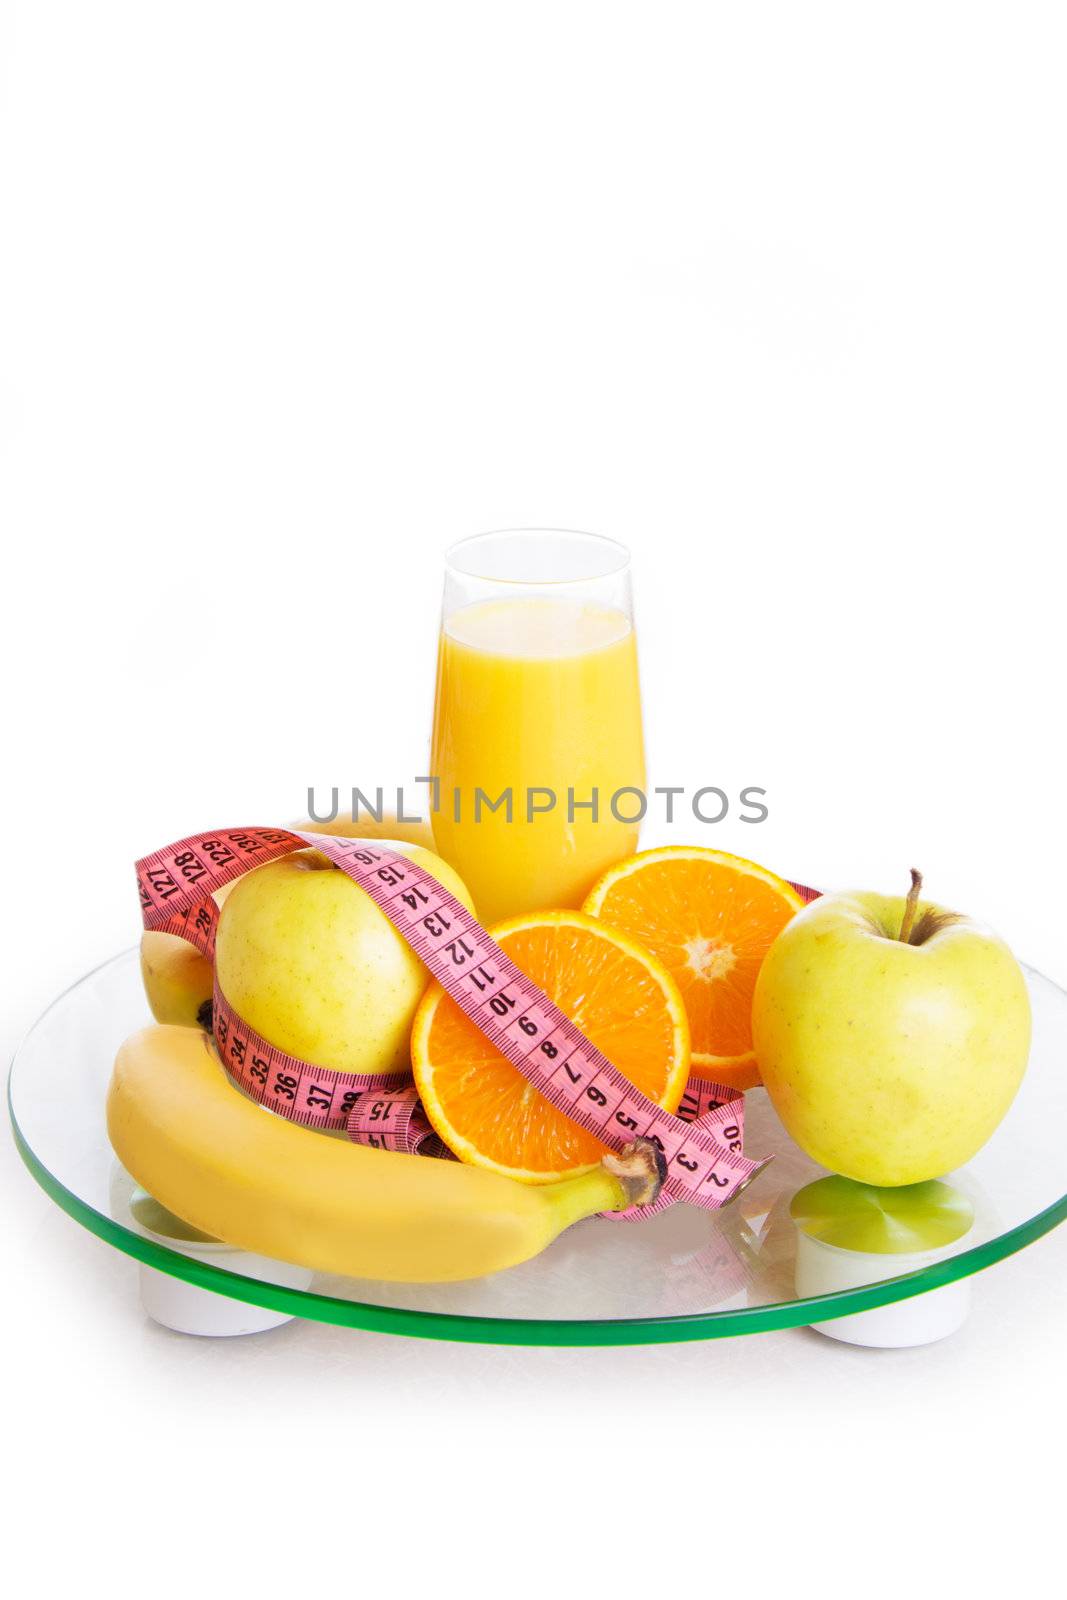 Some fruits, juice and measure tape on scales by Angel_a